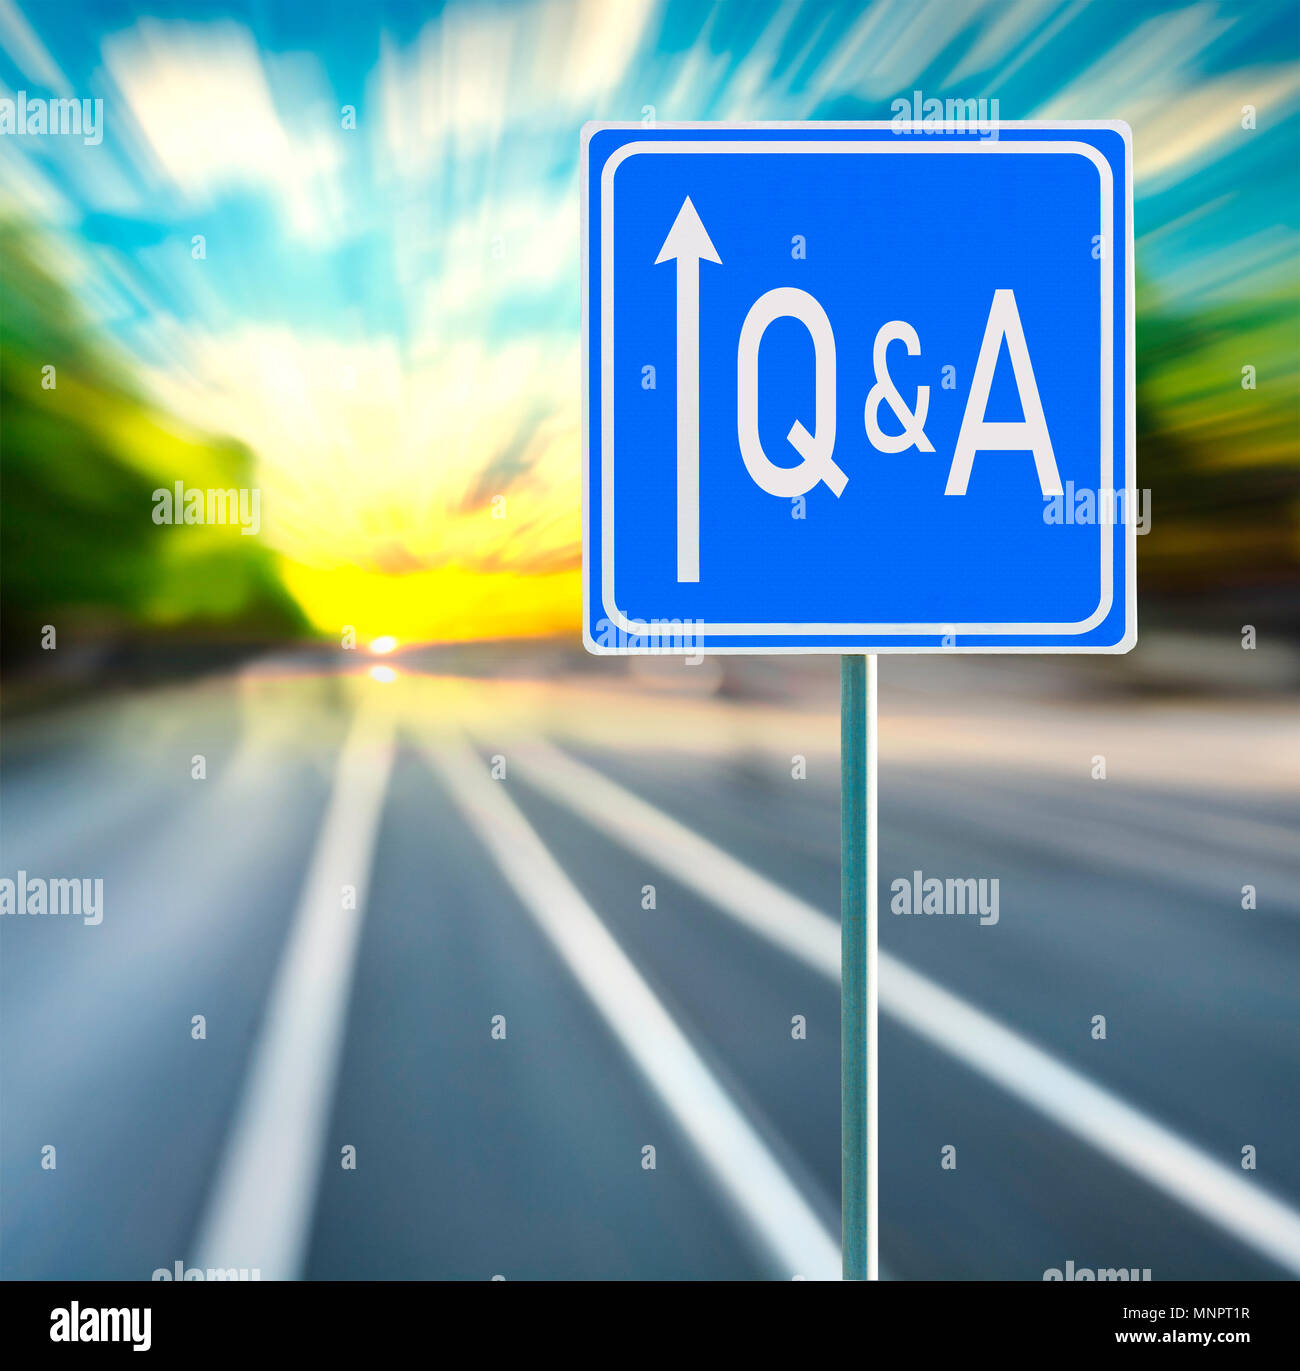 Q & A motivational phrase on blue road sign with arrow and blurred speedy background in sunset. Copy space. Stock Photo